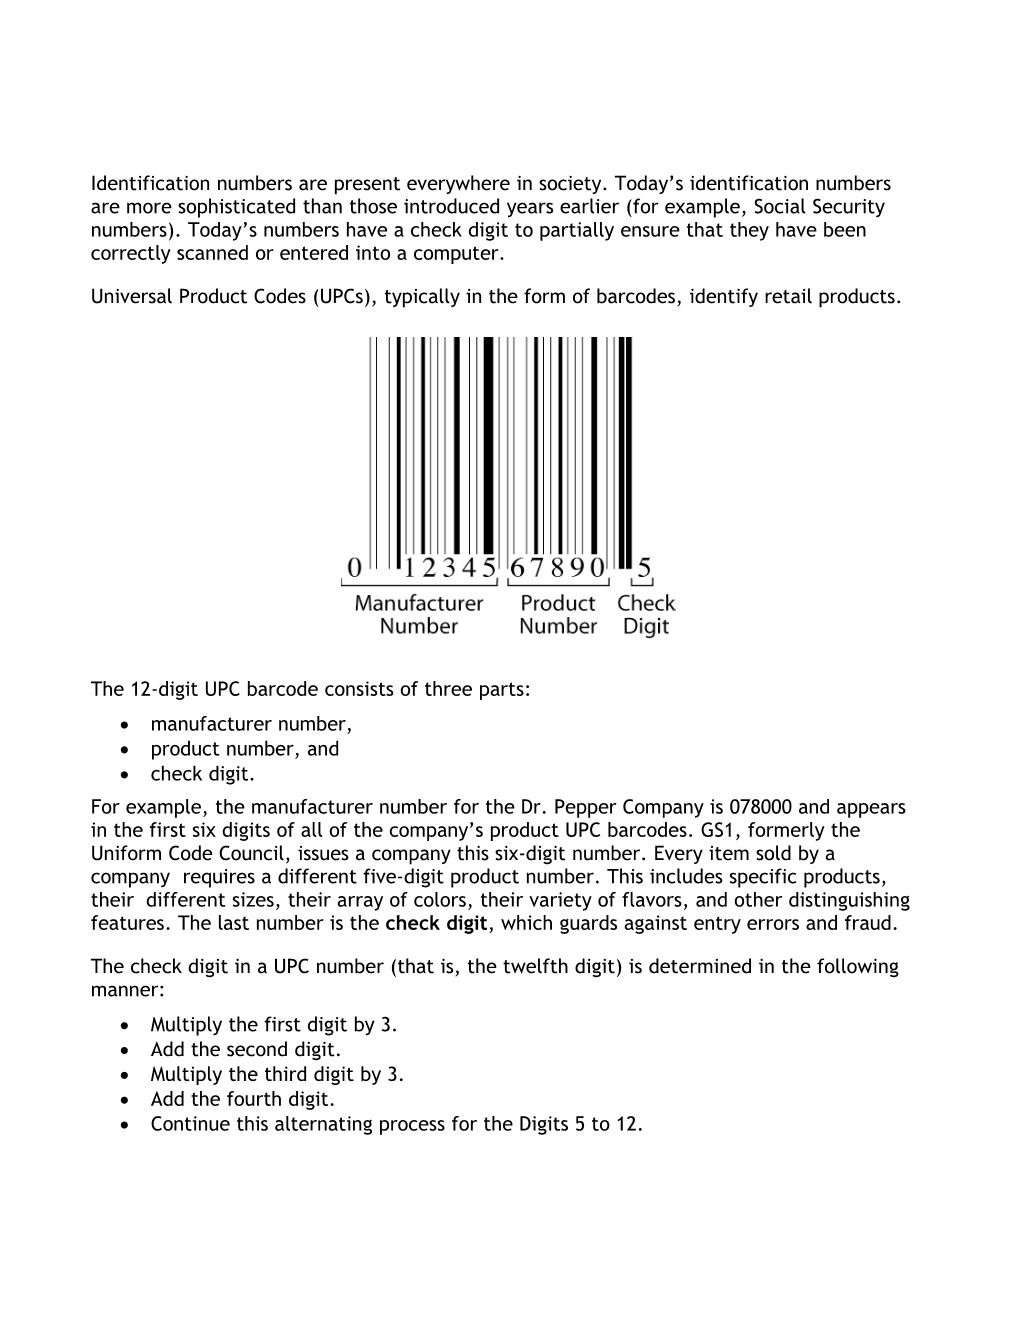 Universal Product Codes (Upcs), Typically in the Form of Barcodes, Identify Retail Products